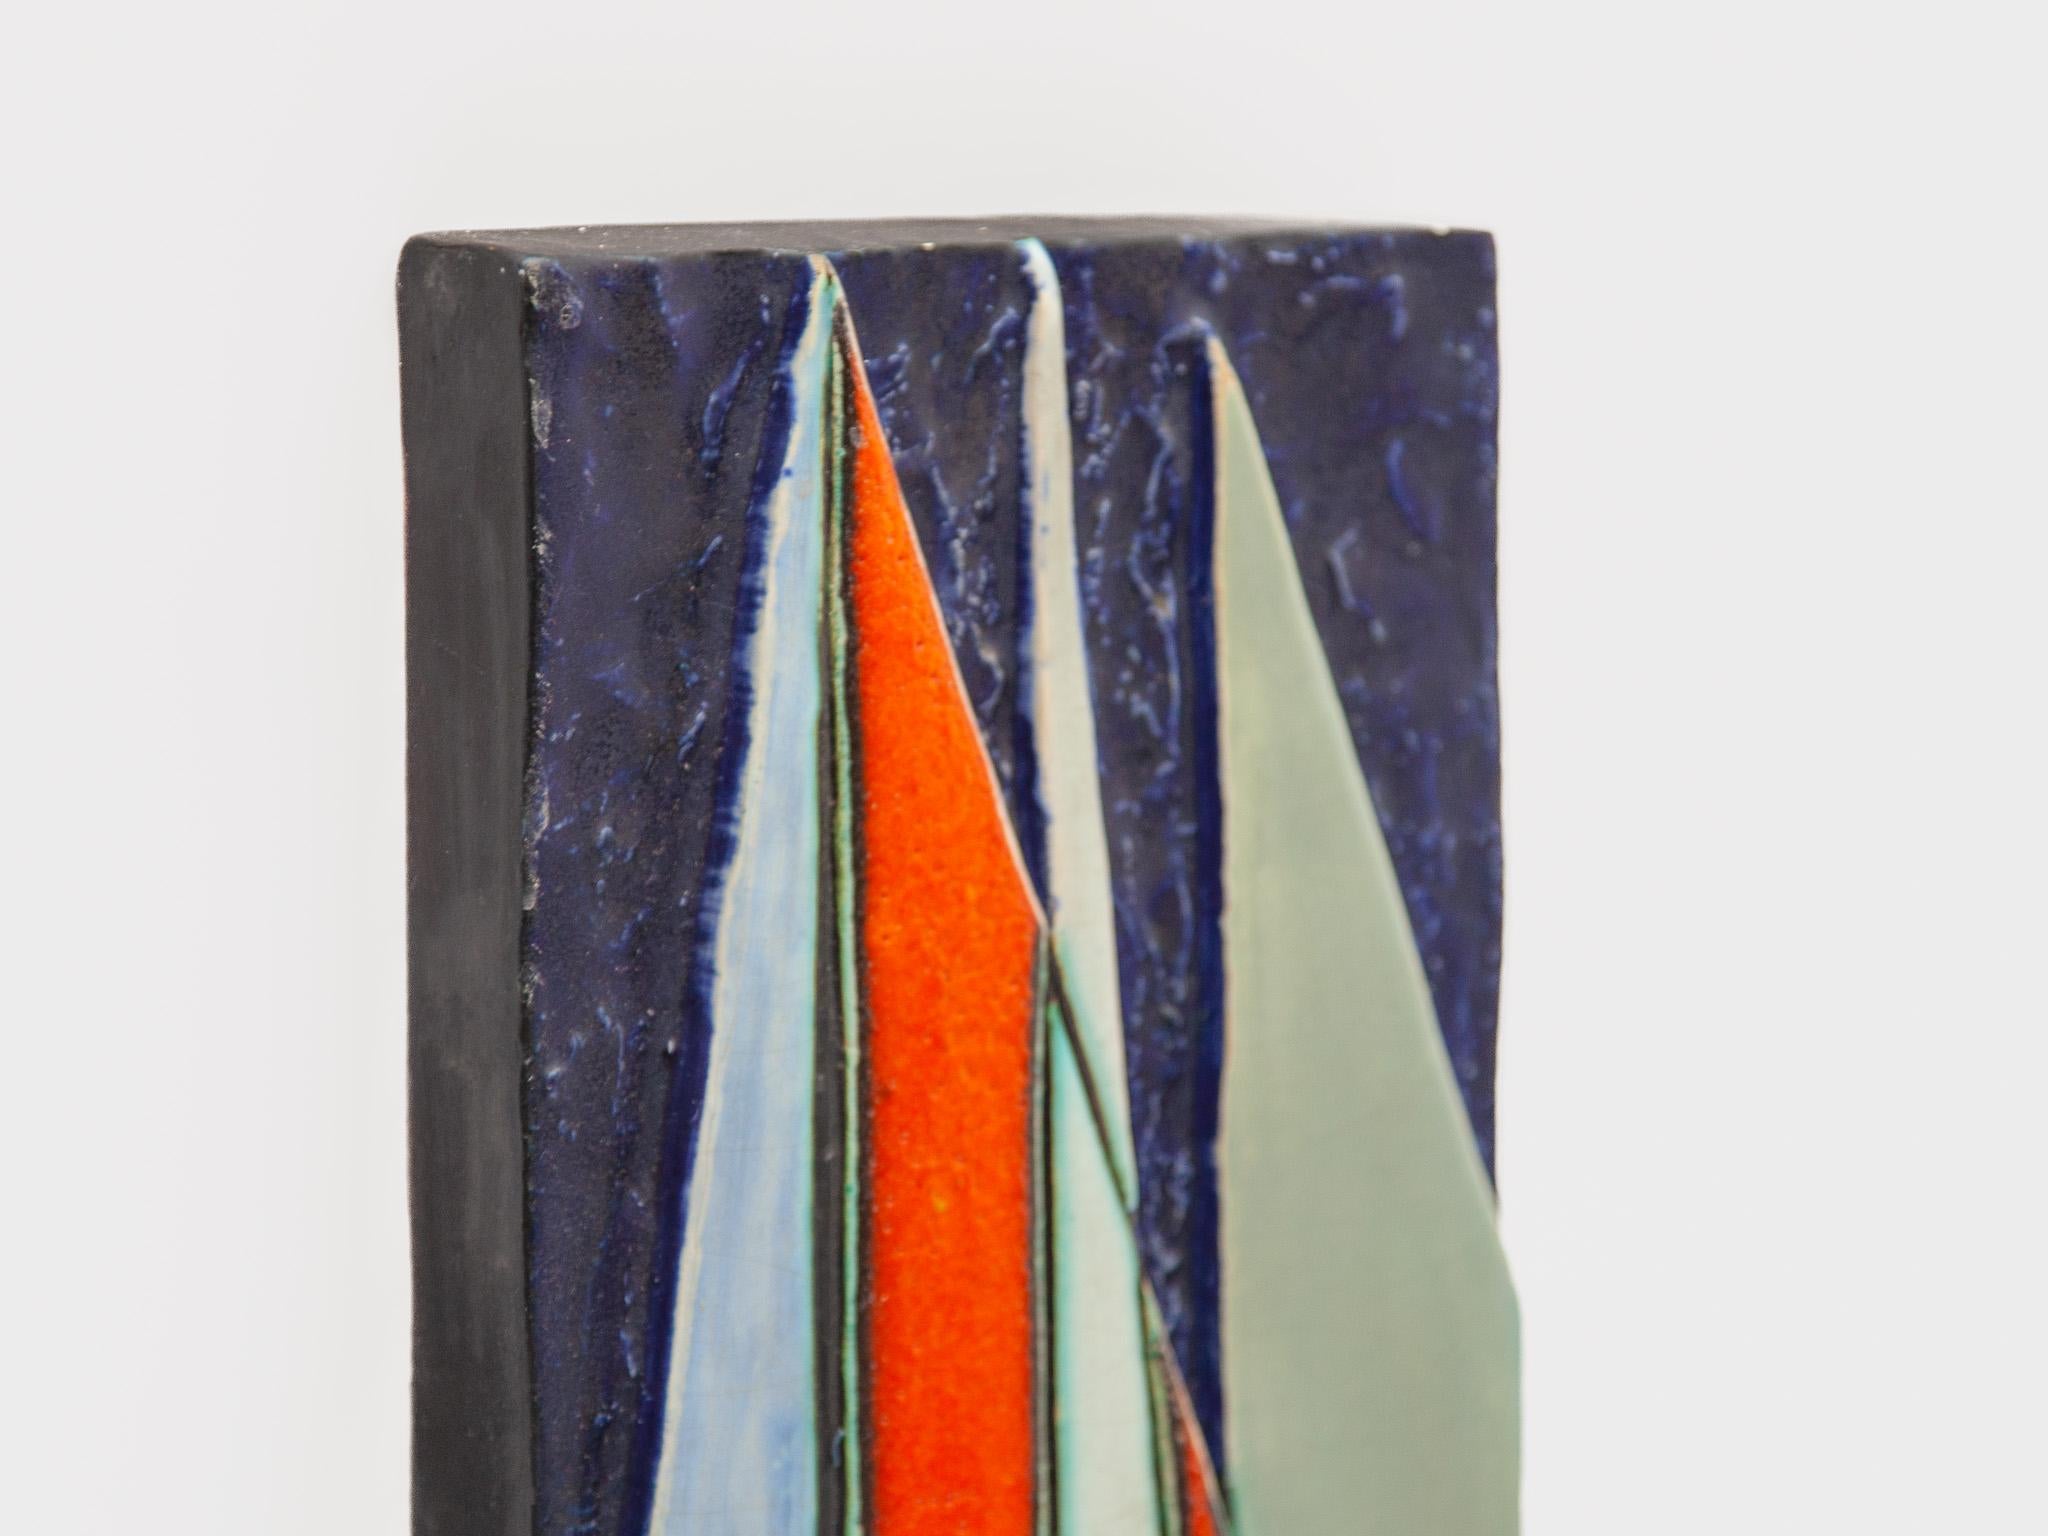 Ceramic German Abstract Sailing Boat Wall Mounted Tile by Helmut Schäffenacker, 1960s For Sale